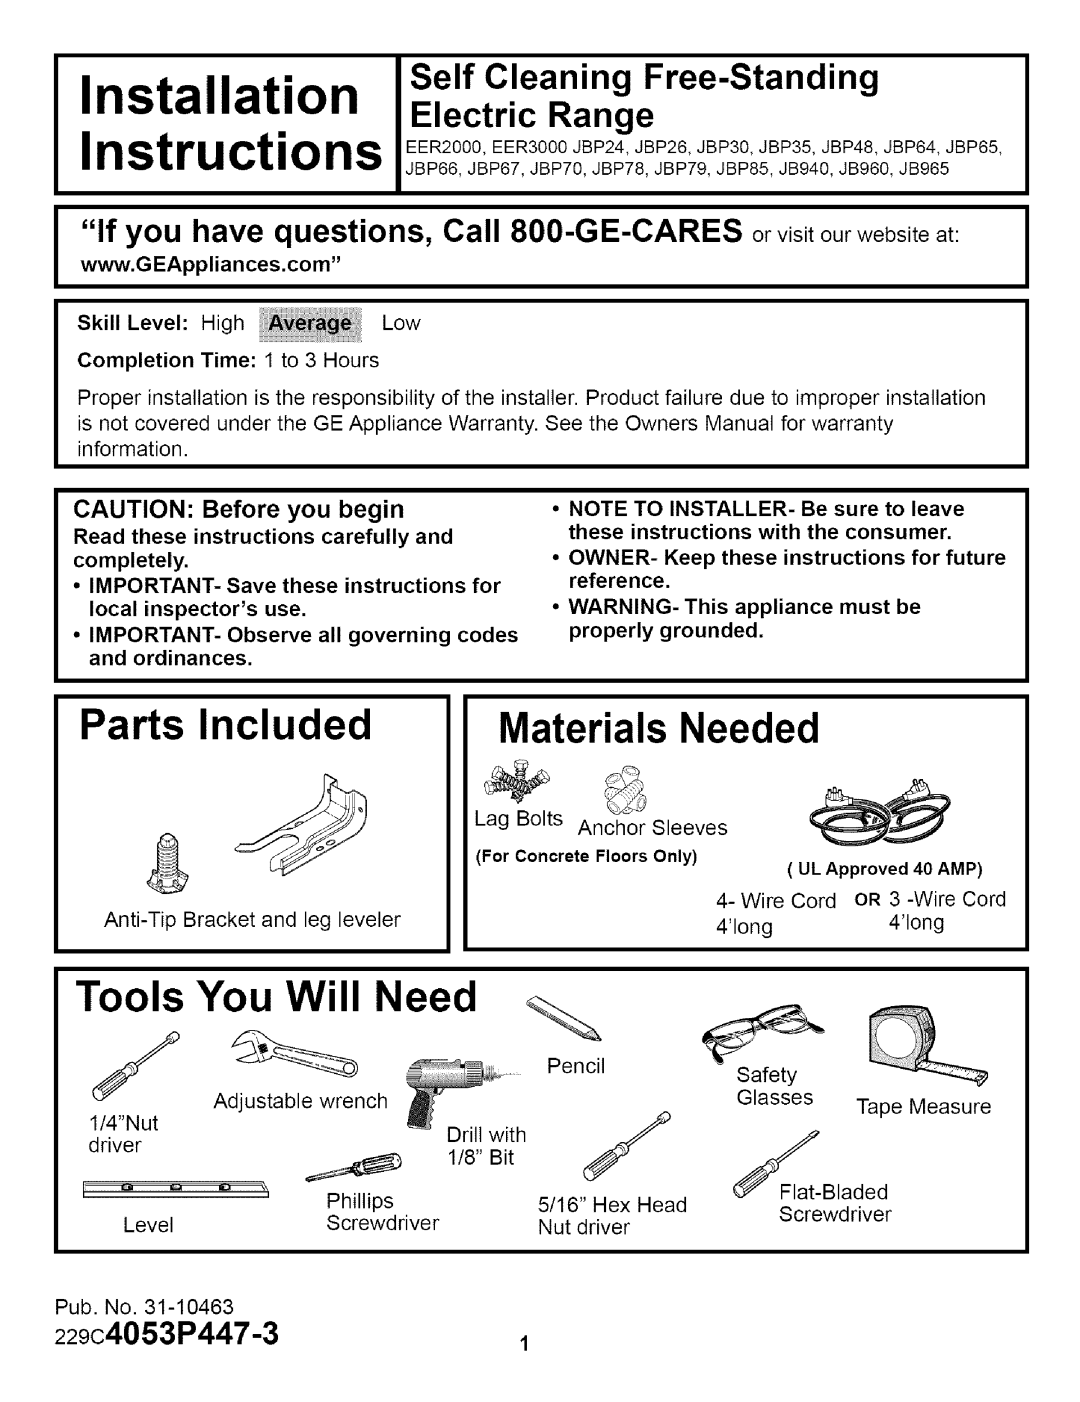 GE JBP79 installation instructions Installation Instructions, Parts Included Materials Needed, Tools You Will Need 